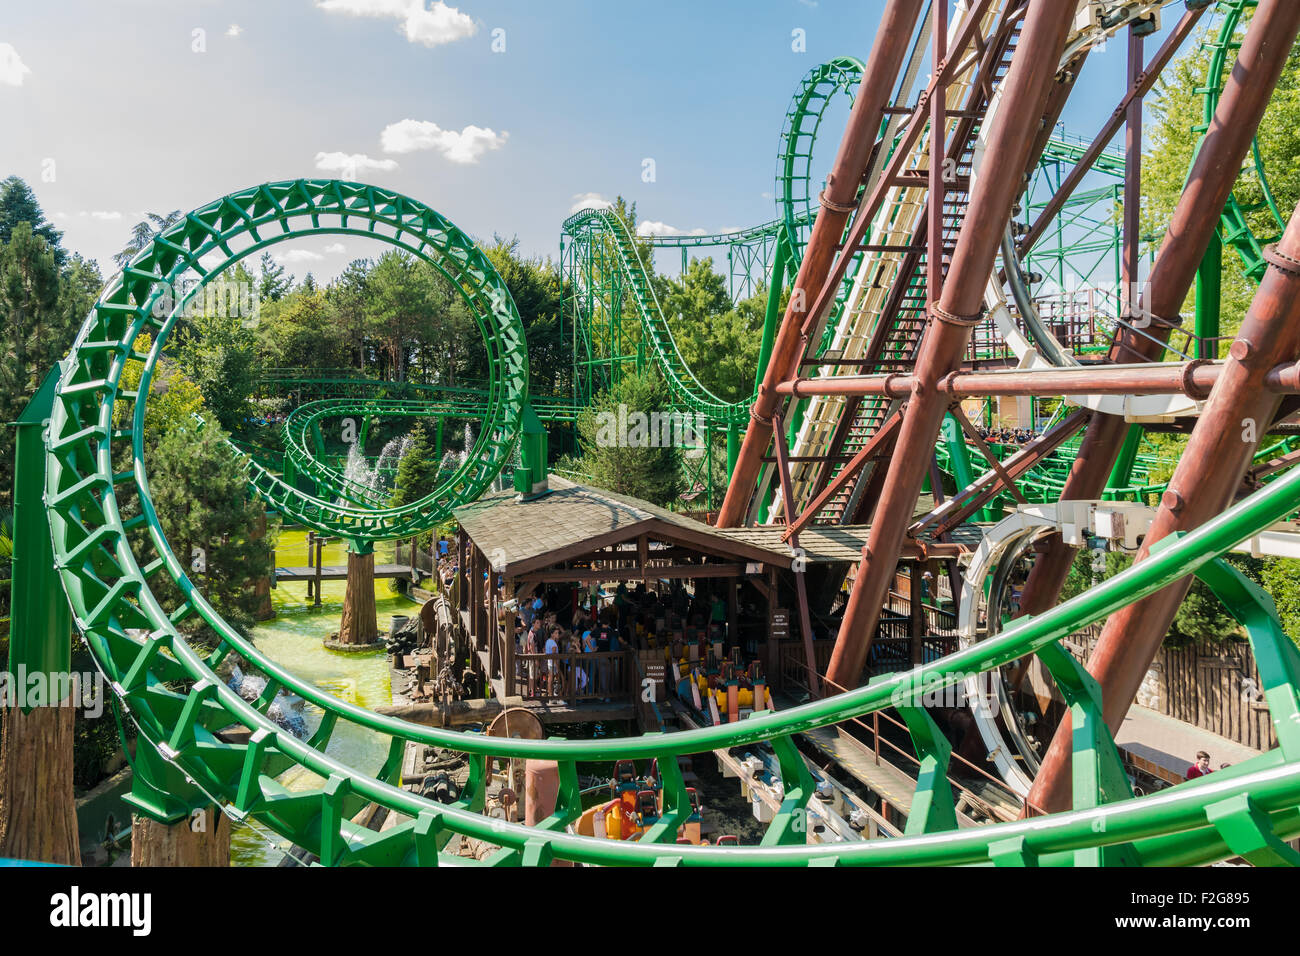 Roller Coaster At Gardaland The Largest Amusement Park In Italy Stock